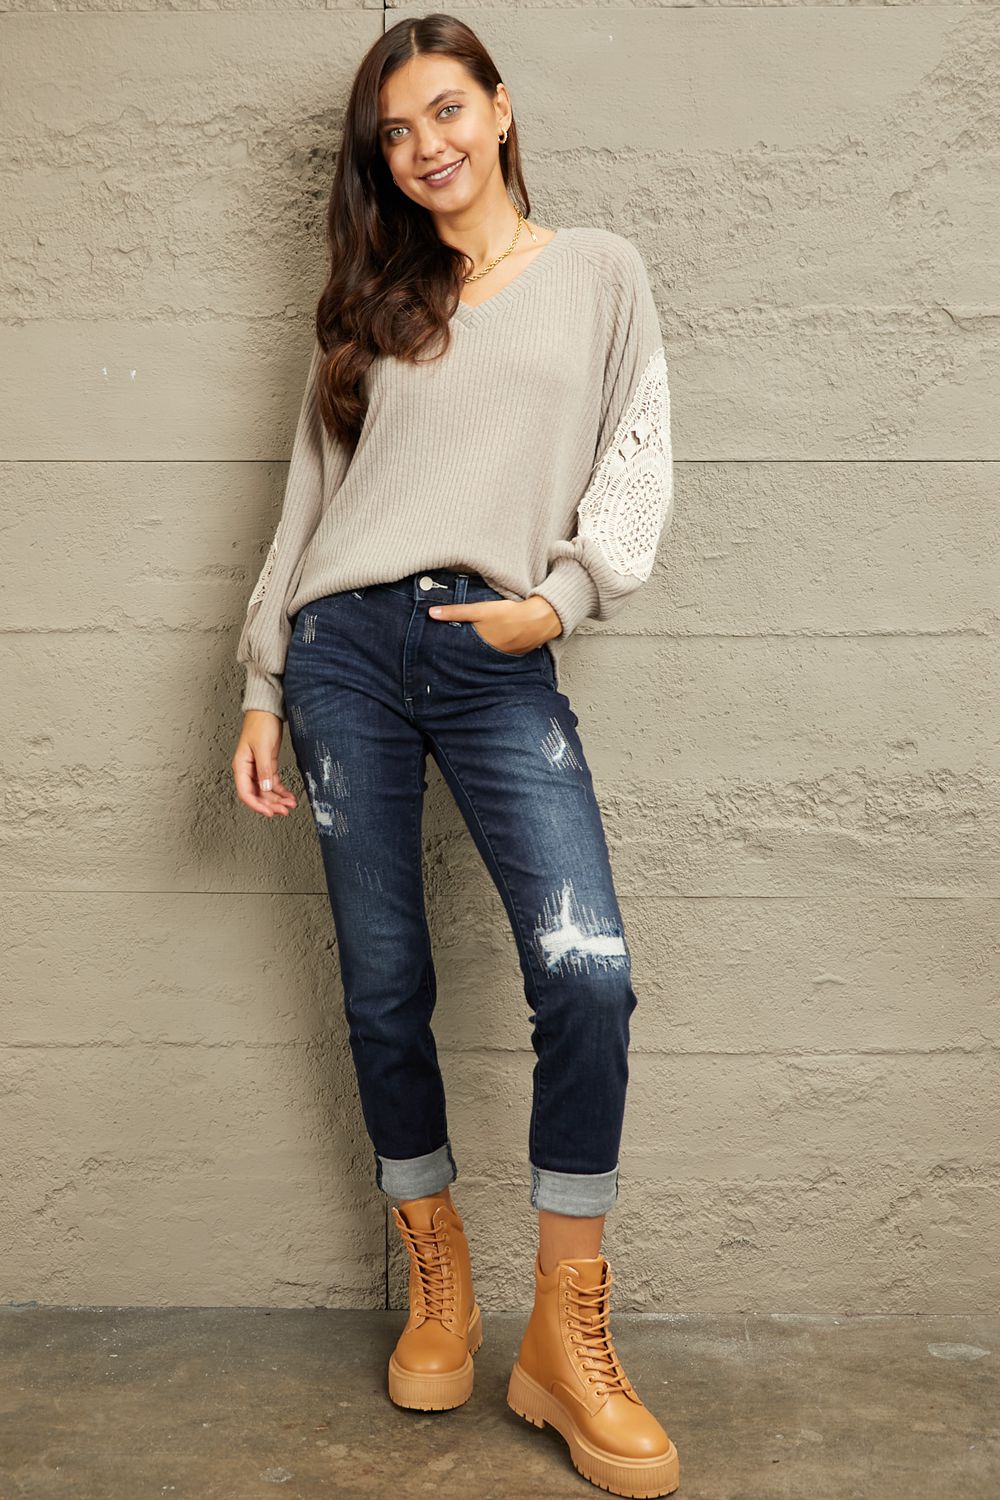 Full Size Lace Patch Detail Sweater - Sweaters - Shirts & Tops - 9 - 2024